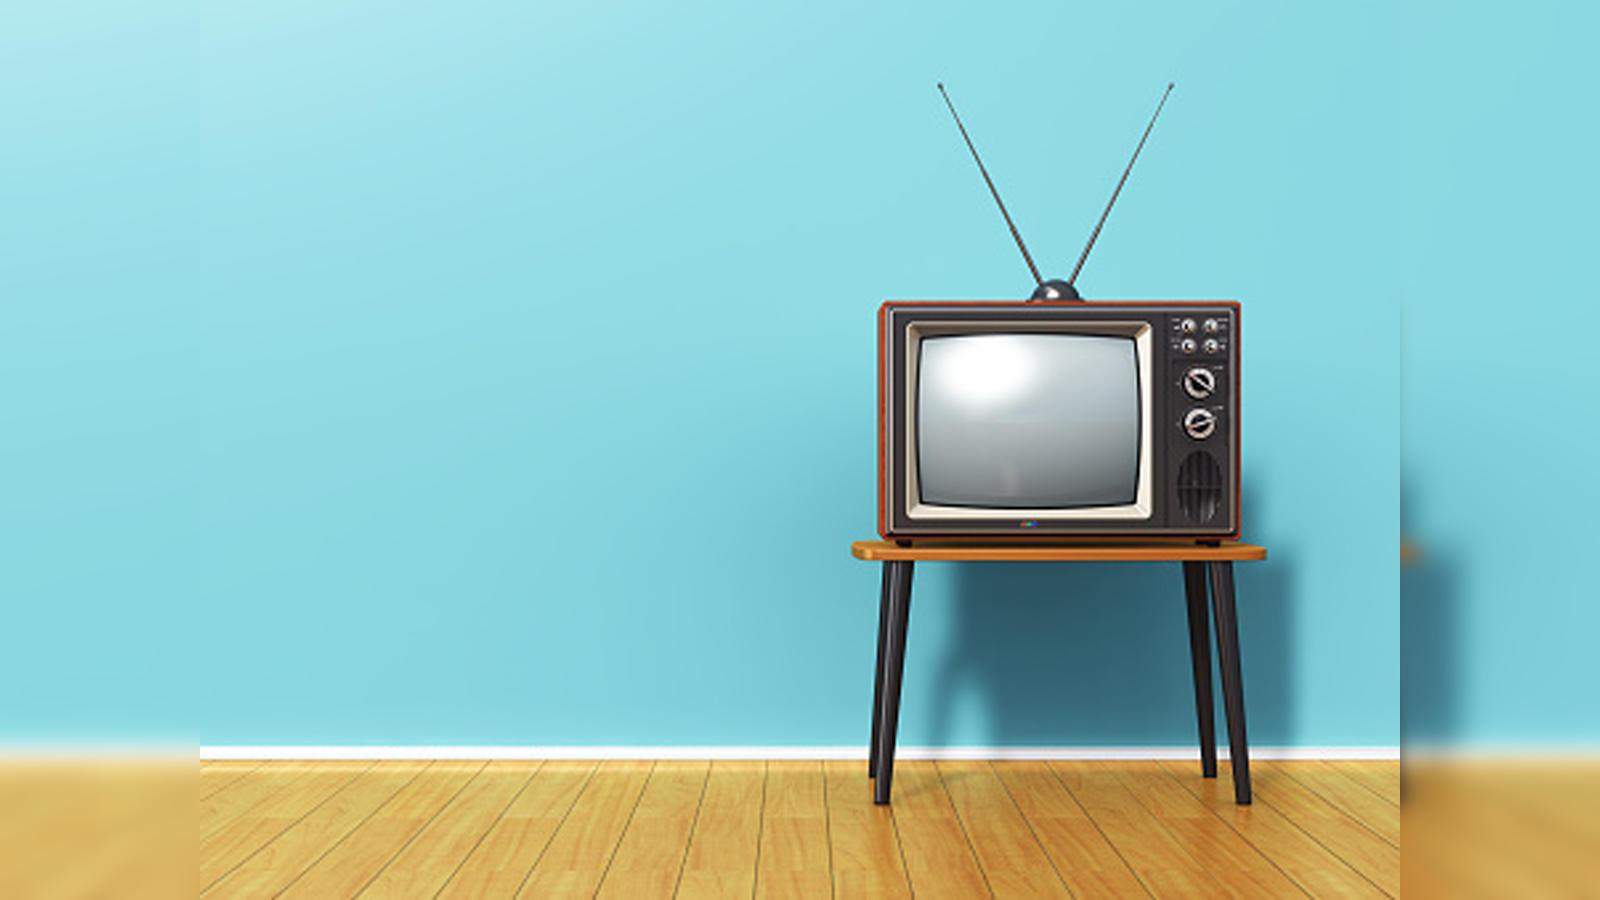 Brains behind idiot box: A quick look at the history of television ...